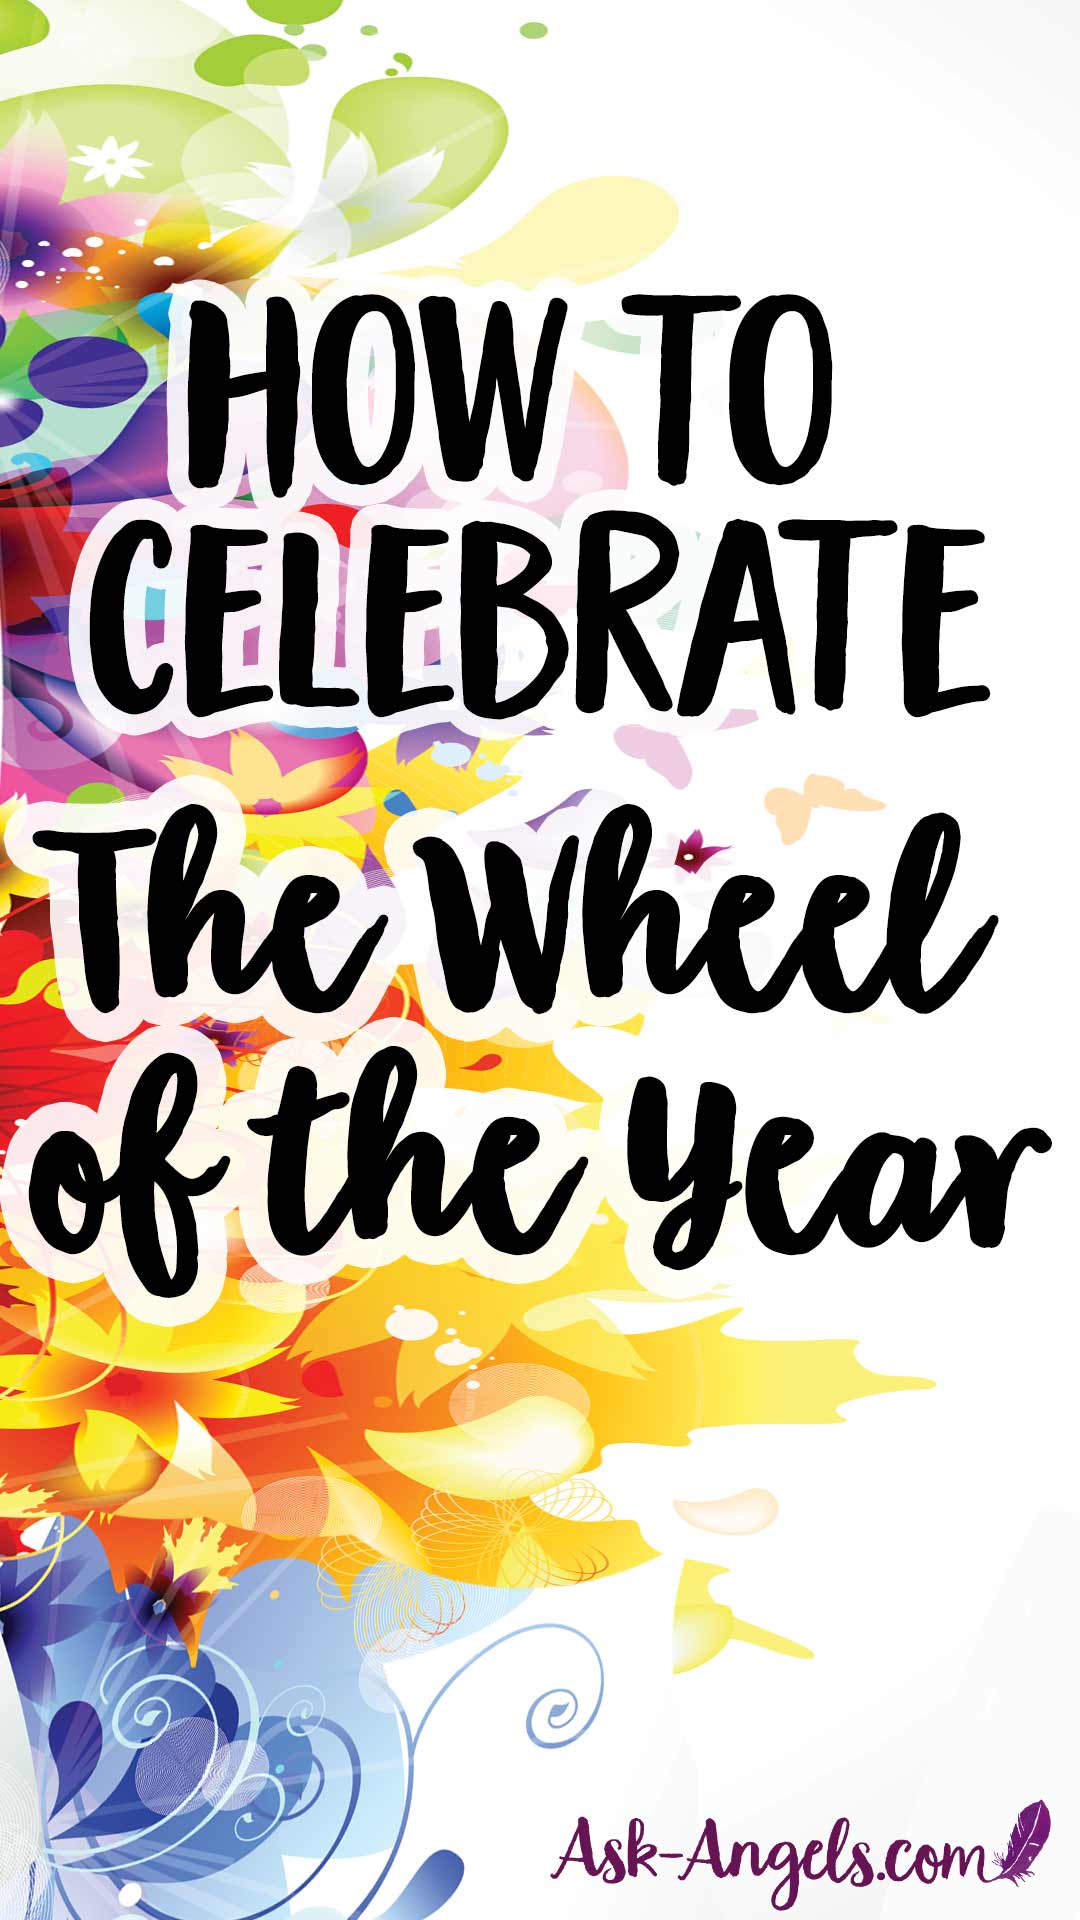 How to Celebrate the Wheel of the Year and honor Gaia through the changing seasons.